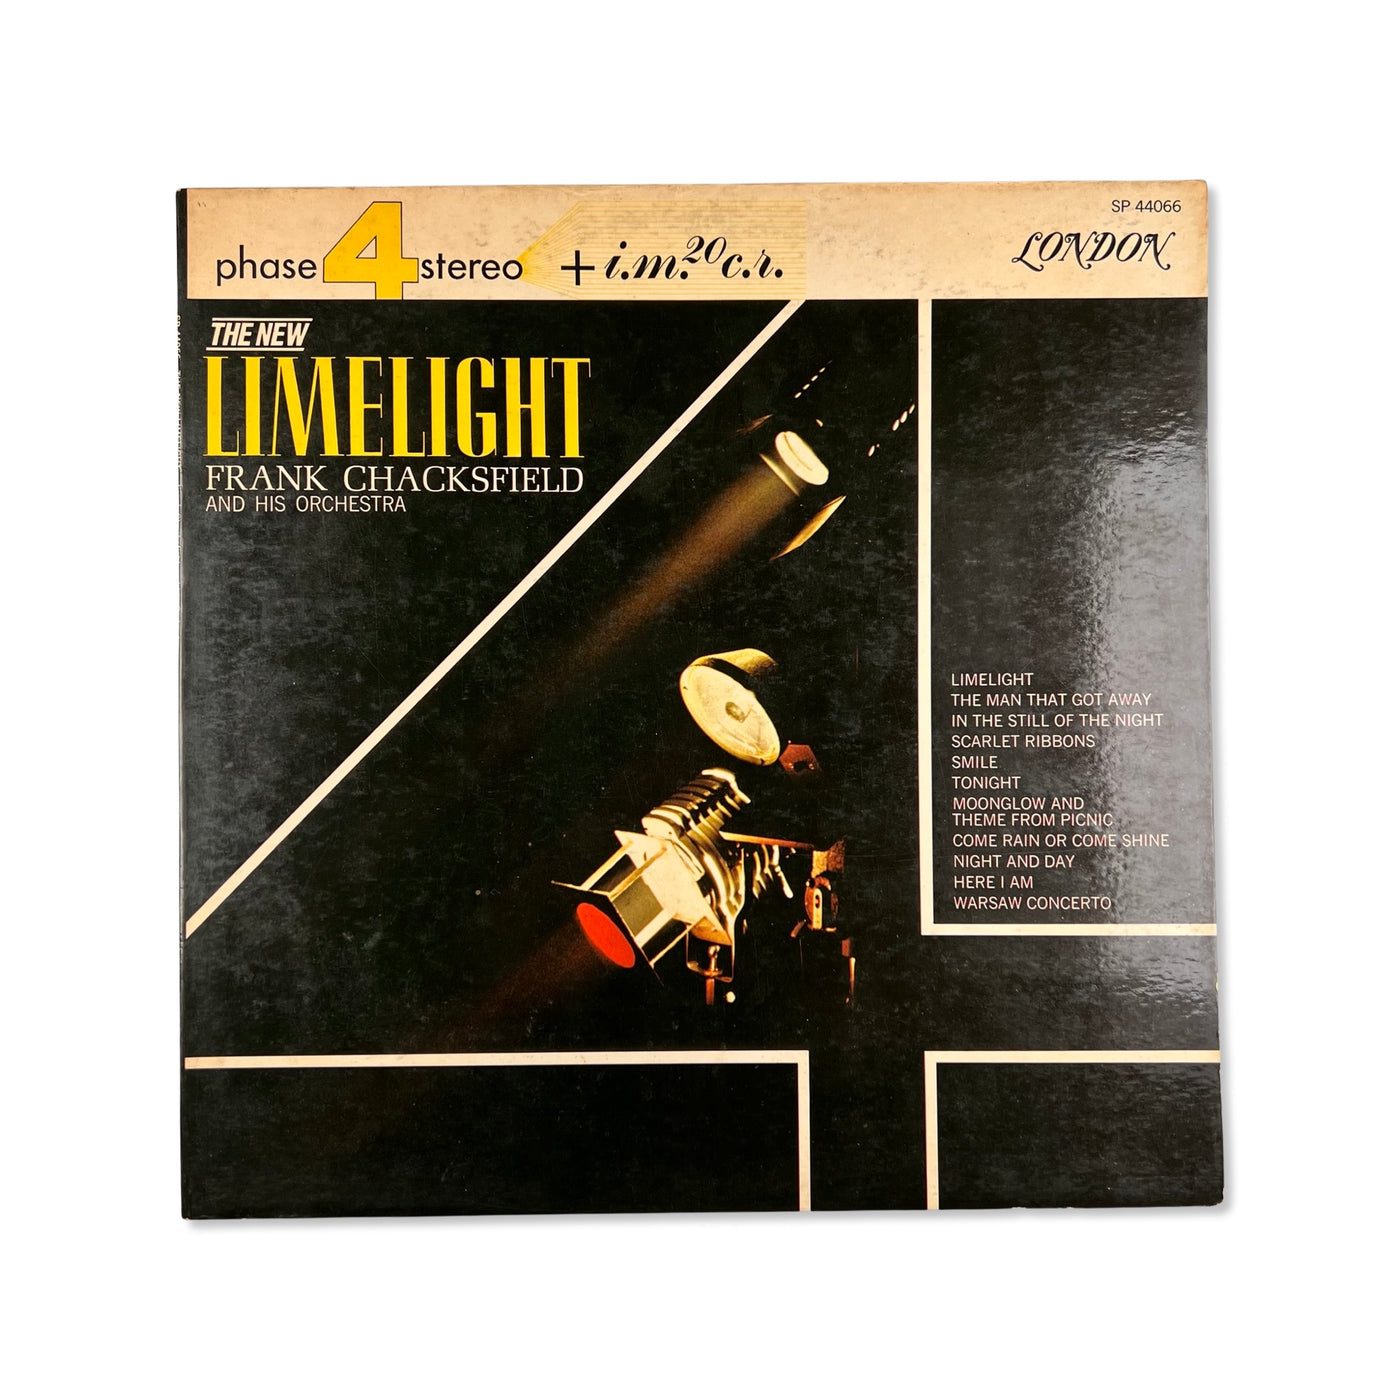 Frank Chacksfield & His Orchestra – The New Limelight